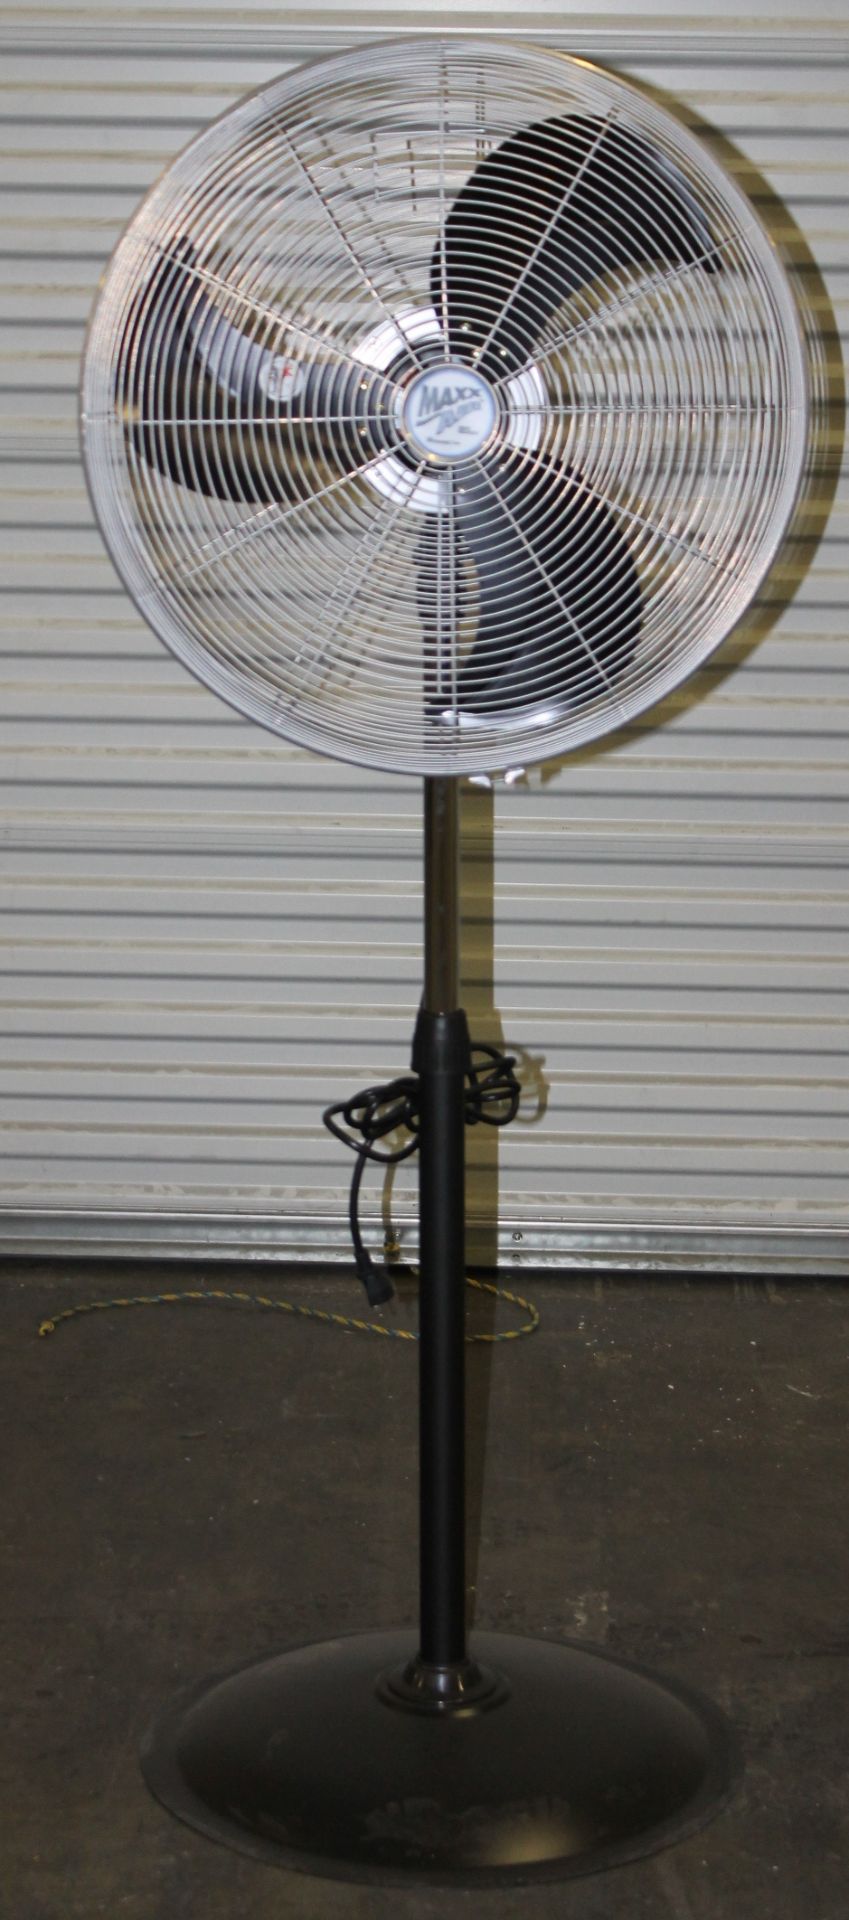 HIGH VELOCITY 22" OSCILLATING PEDESTAL FAN,  HEAVY DUTY 3-SPEED THERMALLY PROTECTED MOTOR, - Image 2 of 3